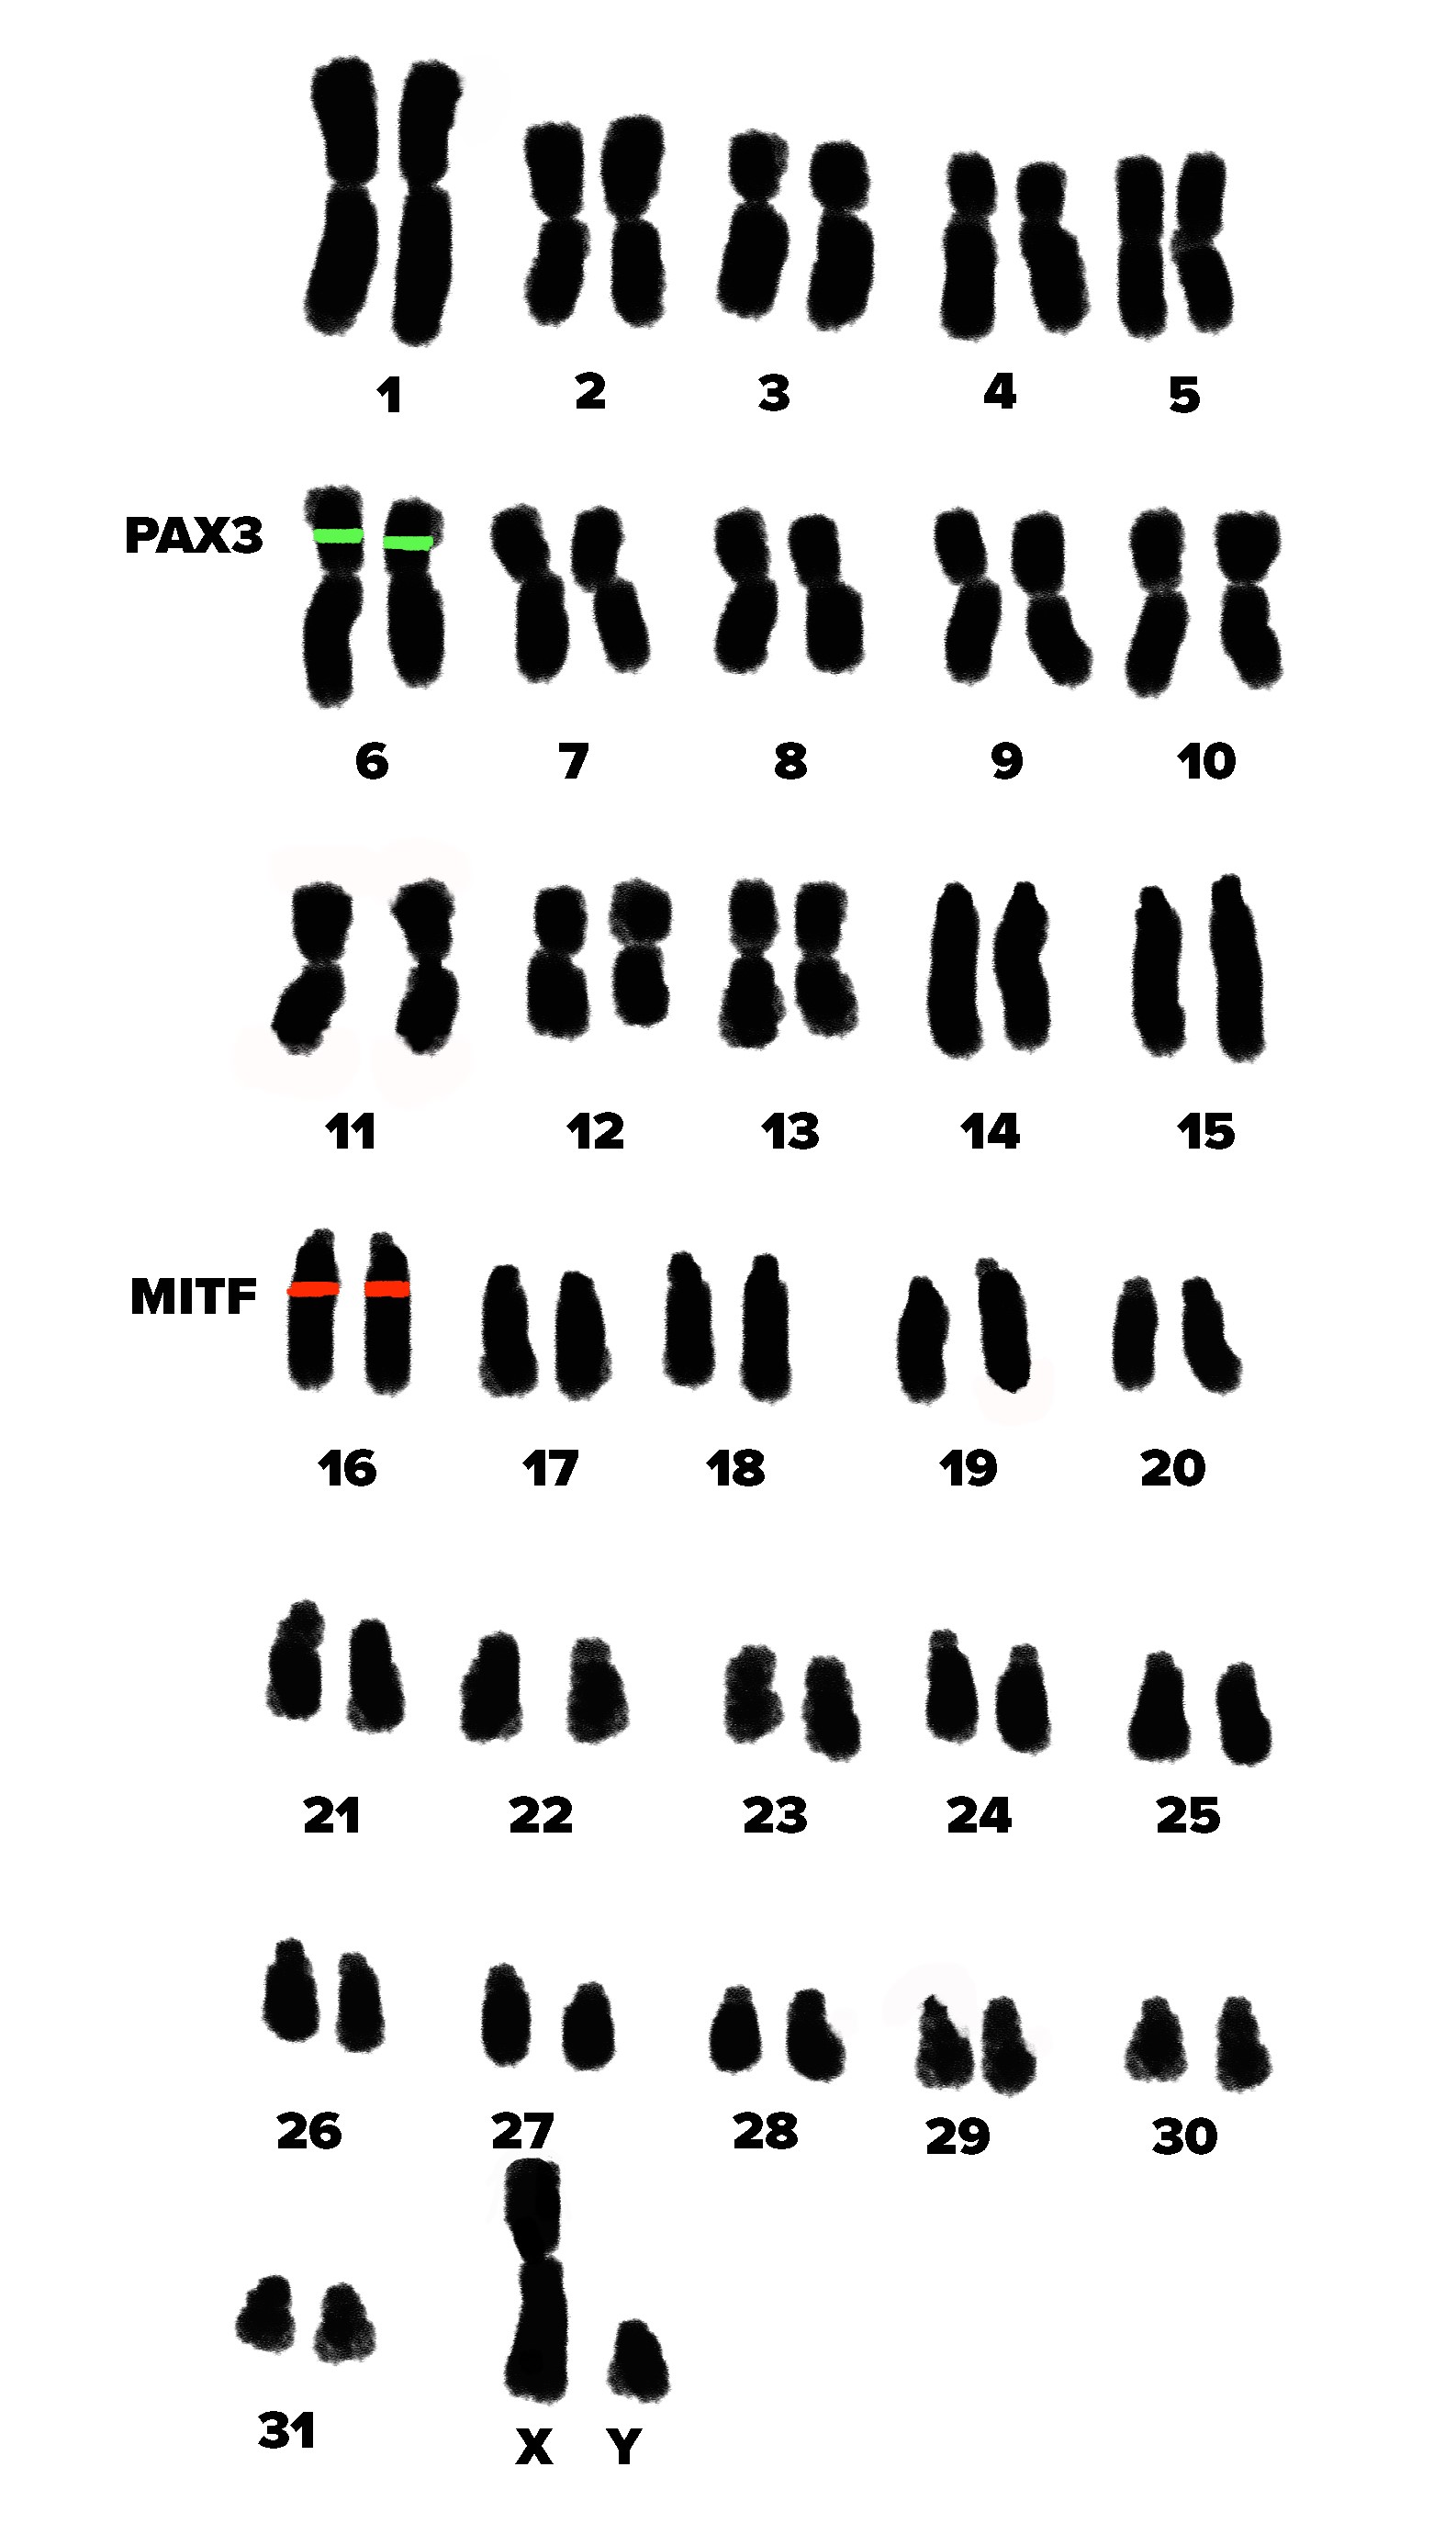 Image illustrating the horse karyotype and location of the PAX3 and MITF genes, responsible for Splashed White patterns